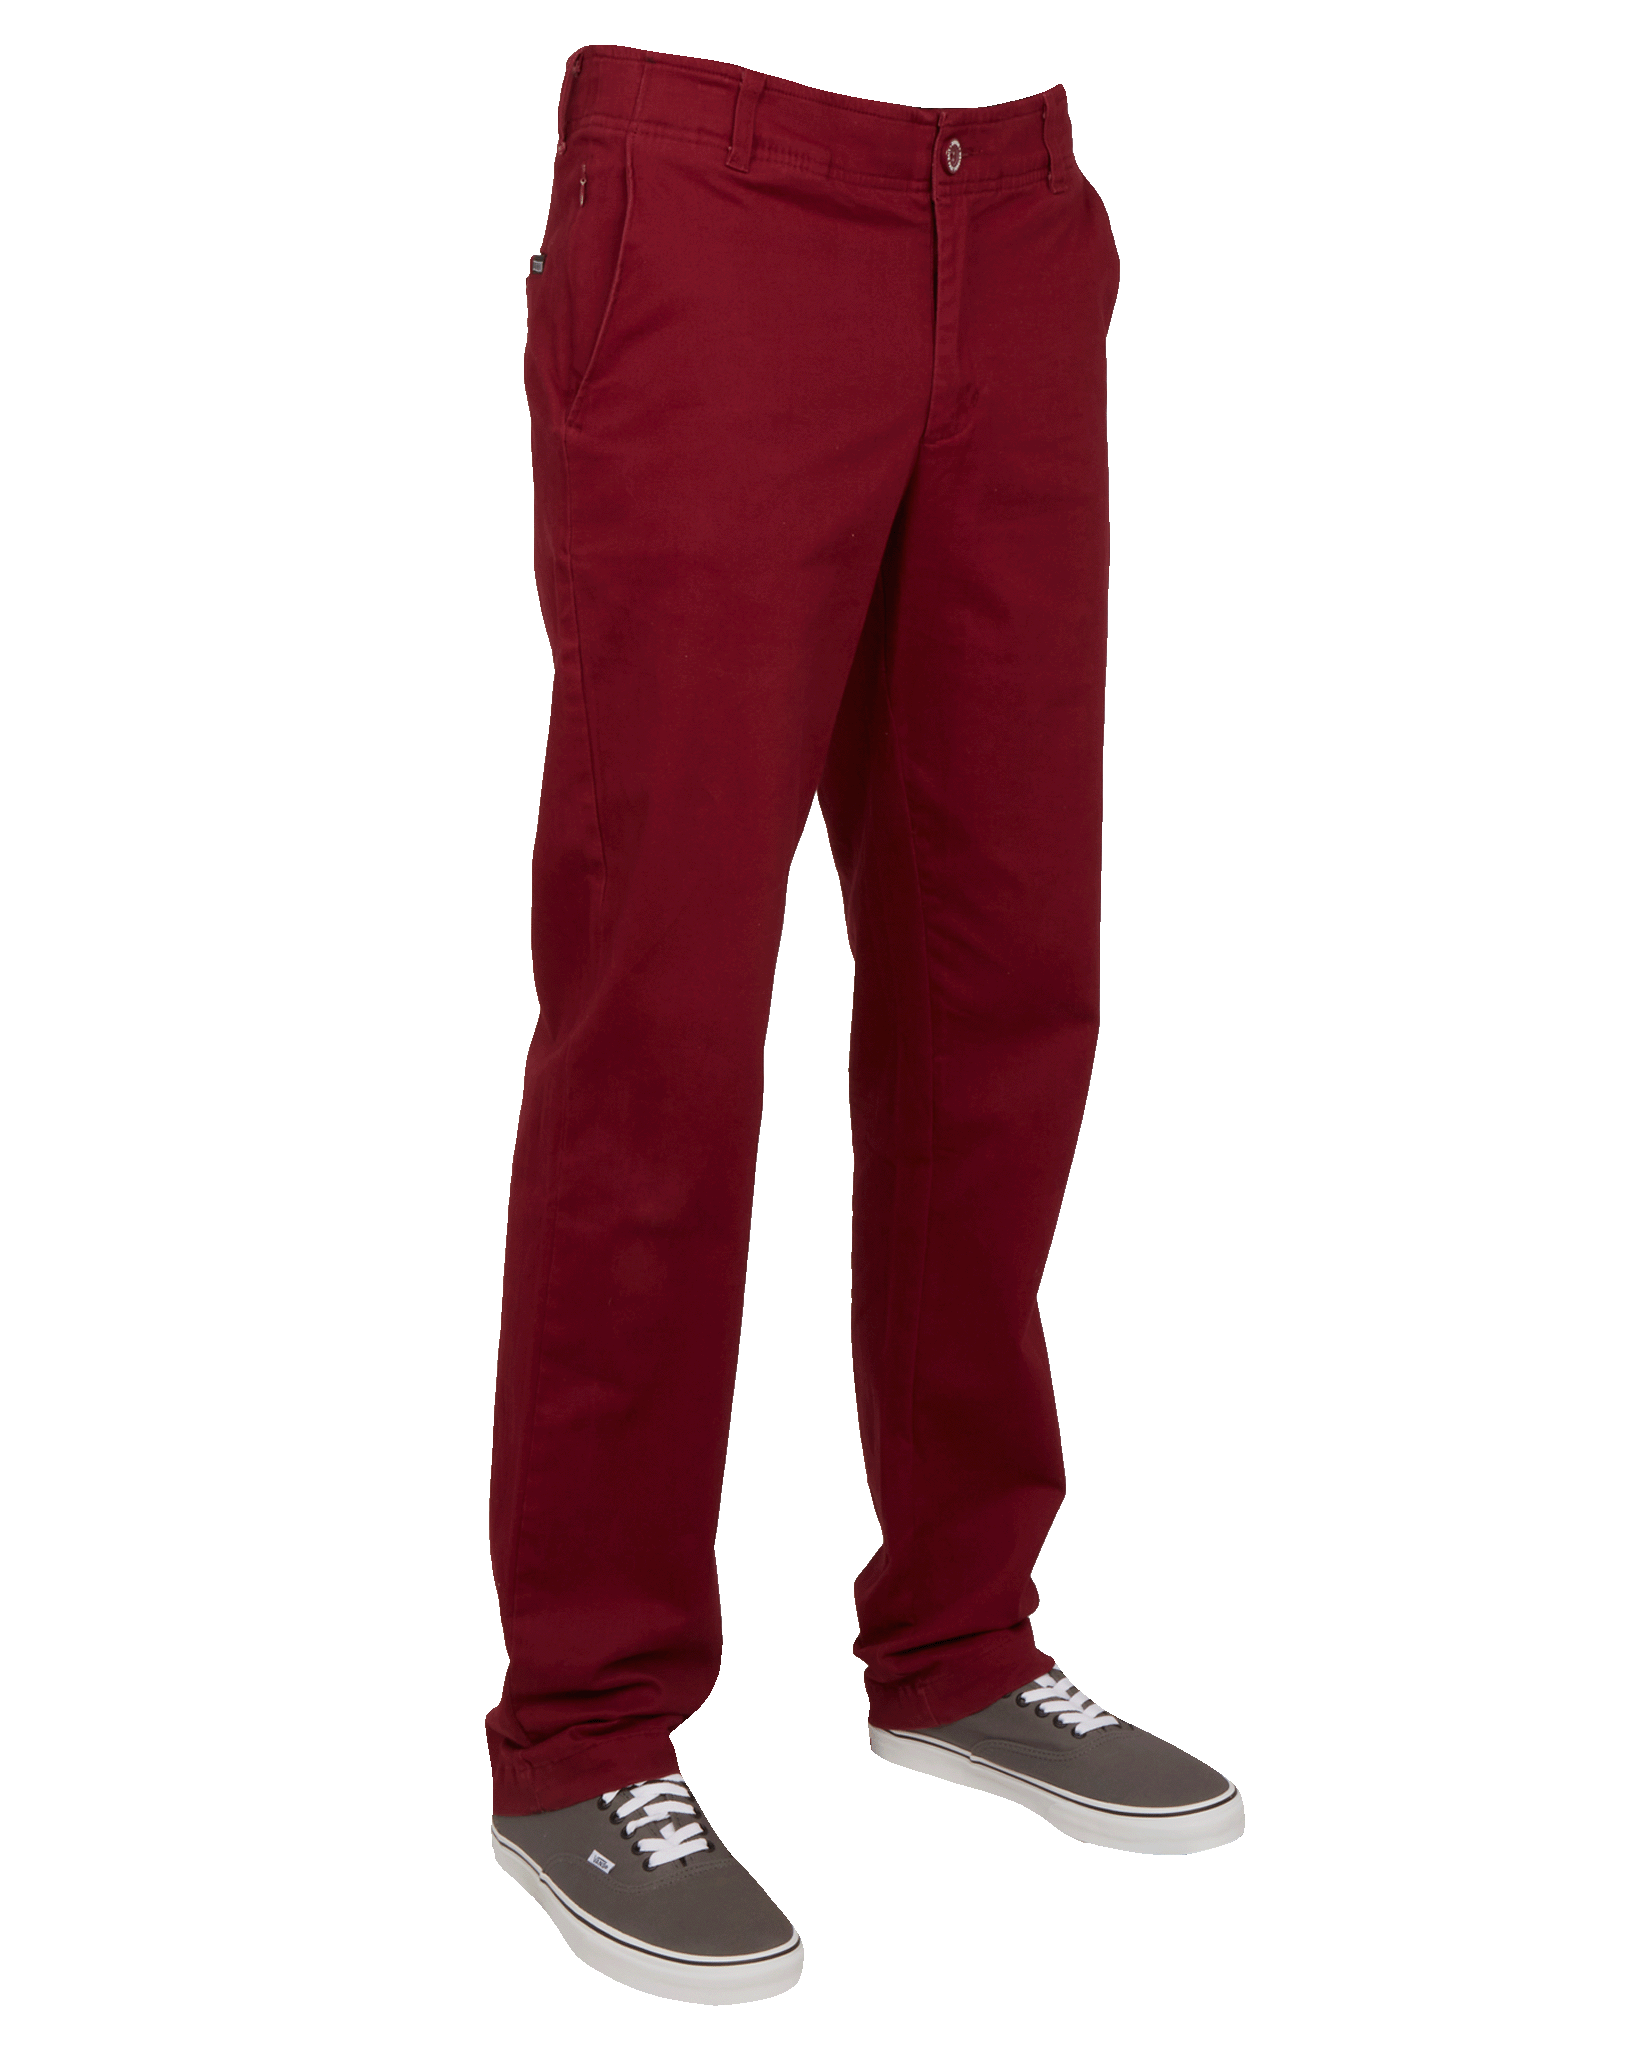 Dark Red & Maroon Pants For Guy's With Shirts Combination Outfits Ideas  2022 | Mens fashion sweaters, Mens dress outfits, Maroon pants